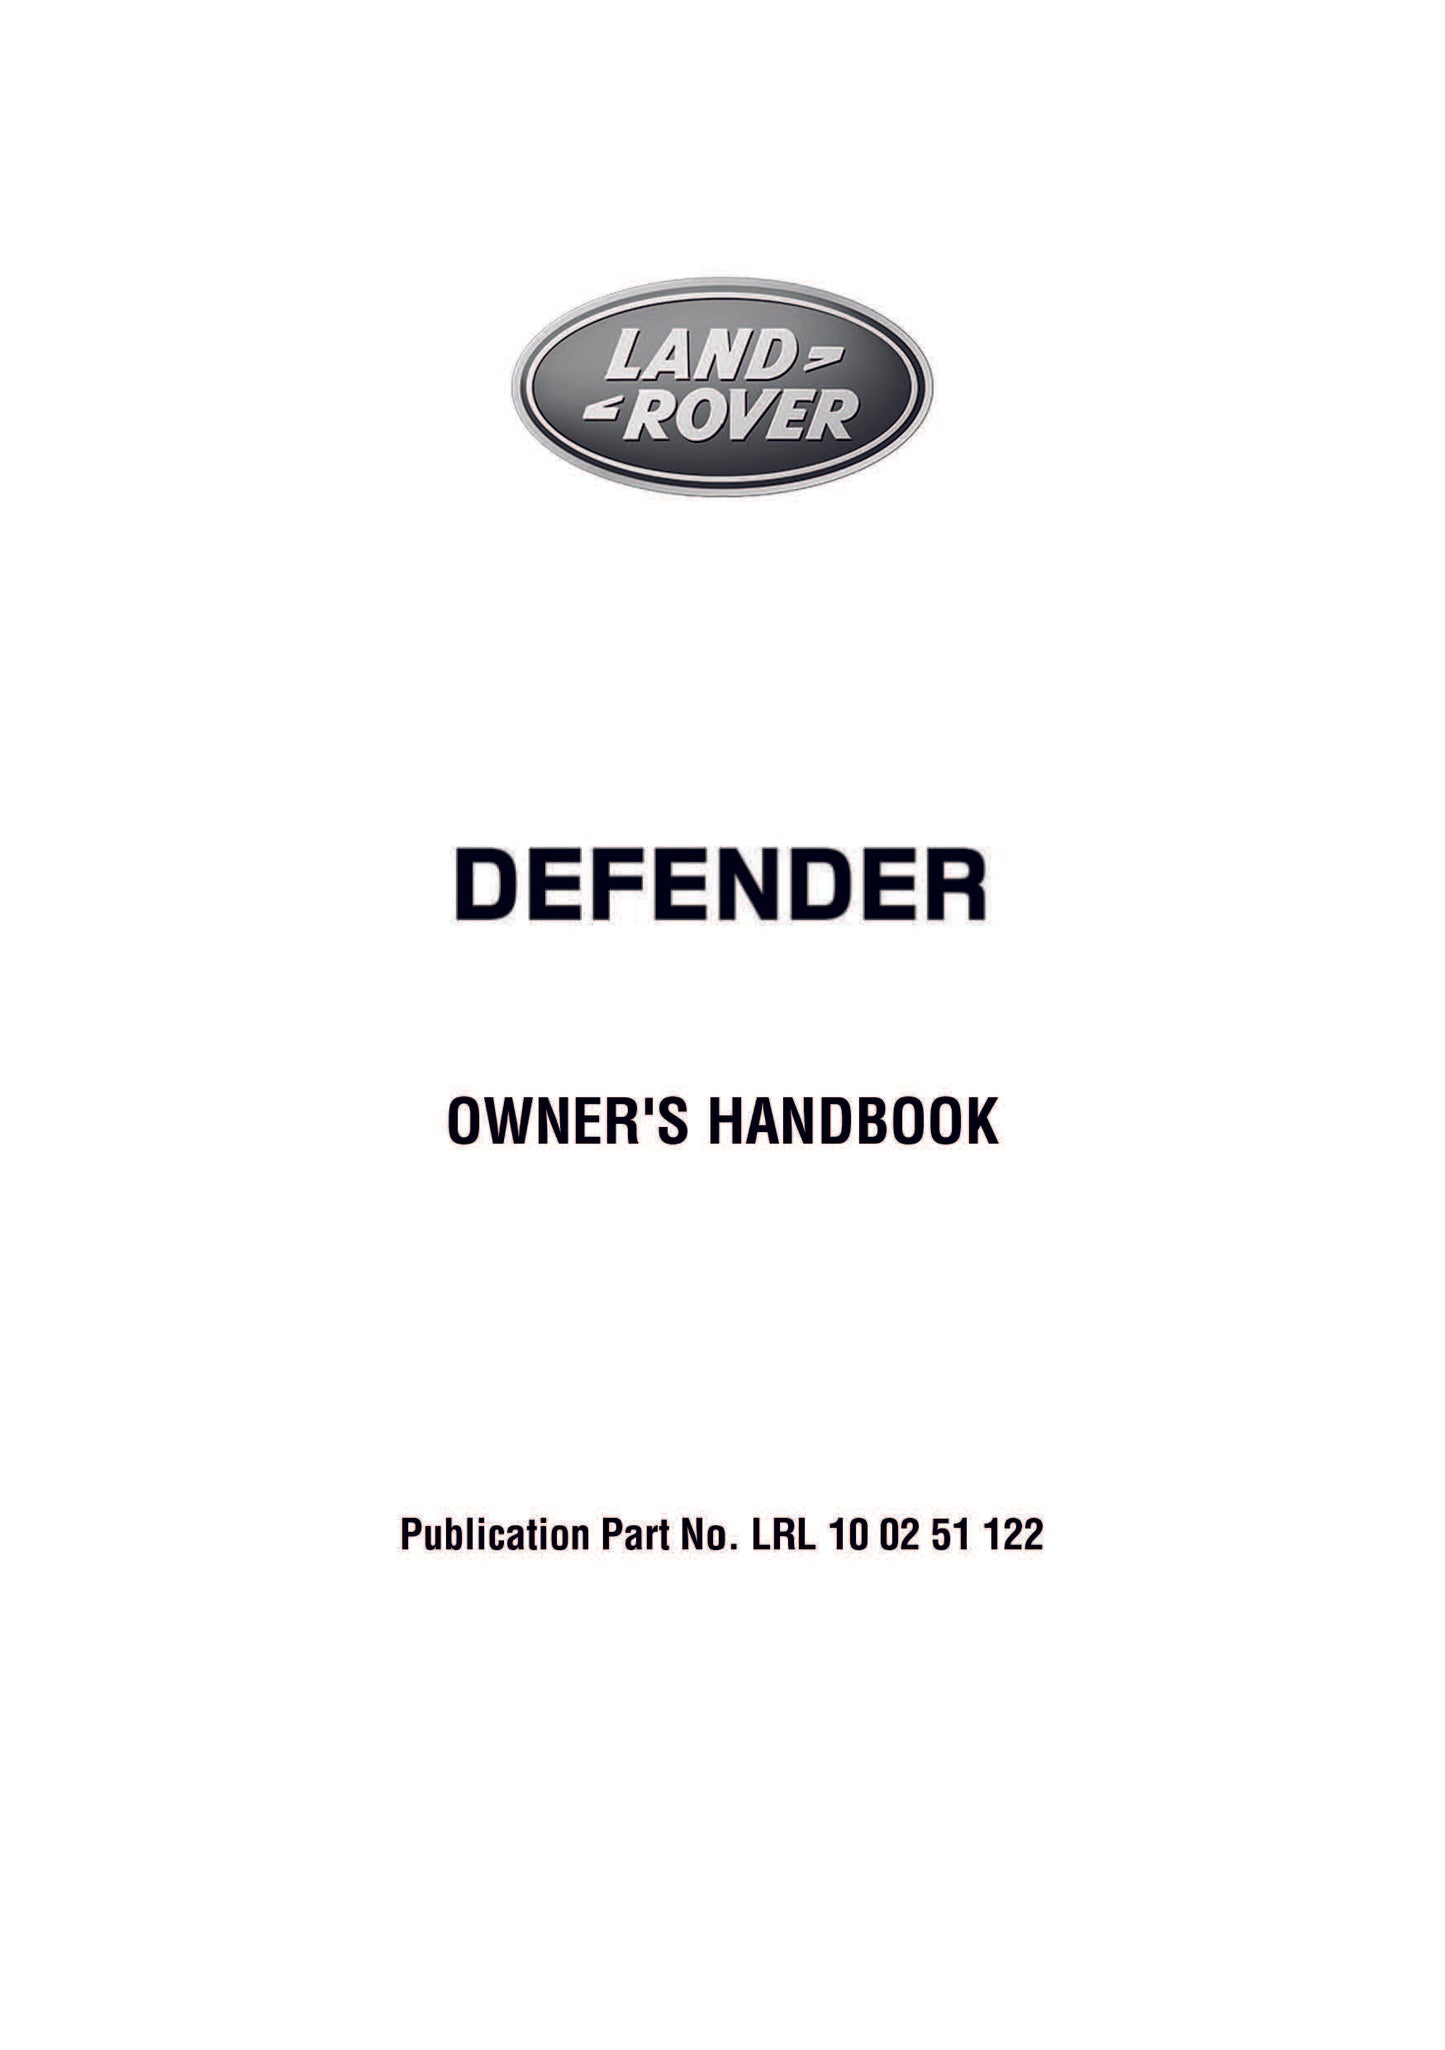 2012 Land Rover Defender Owner's Manual | English